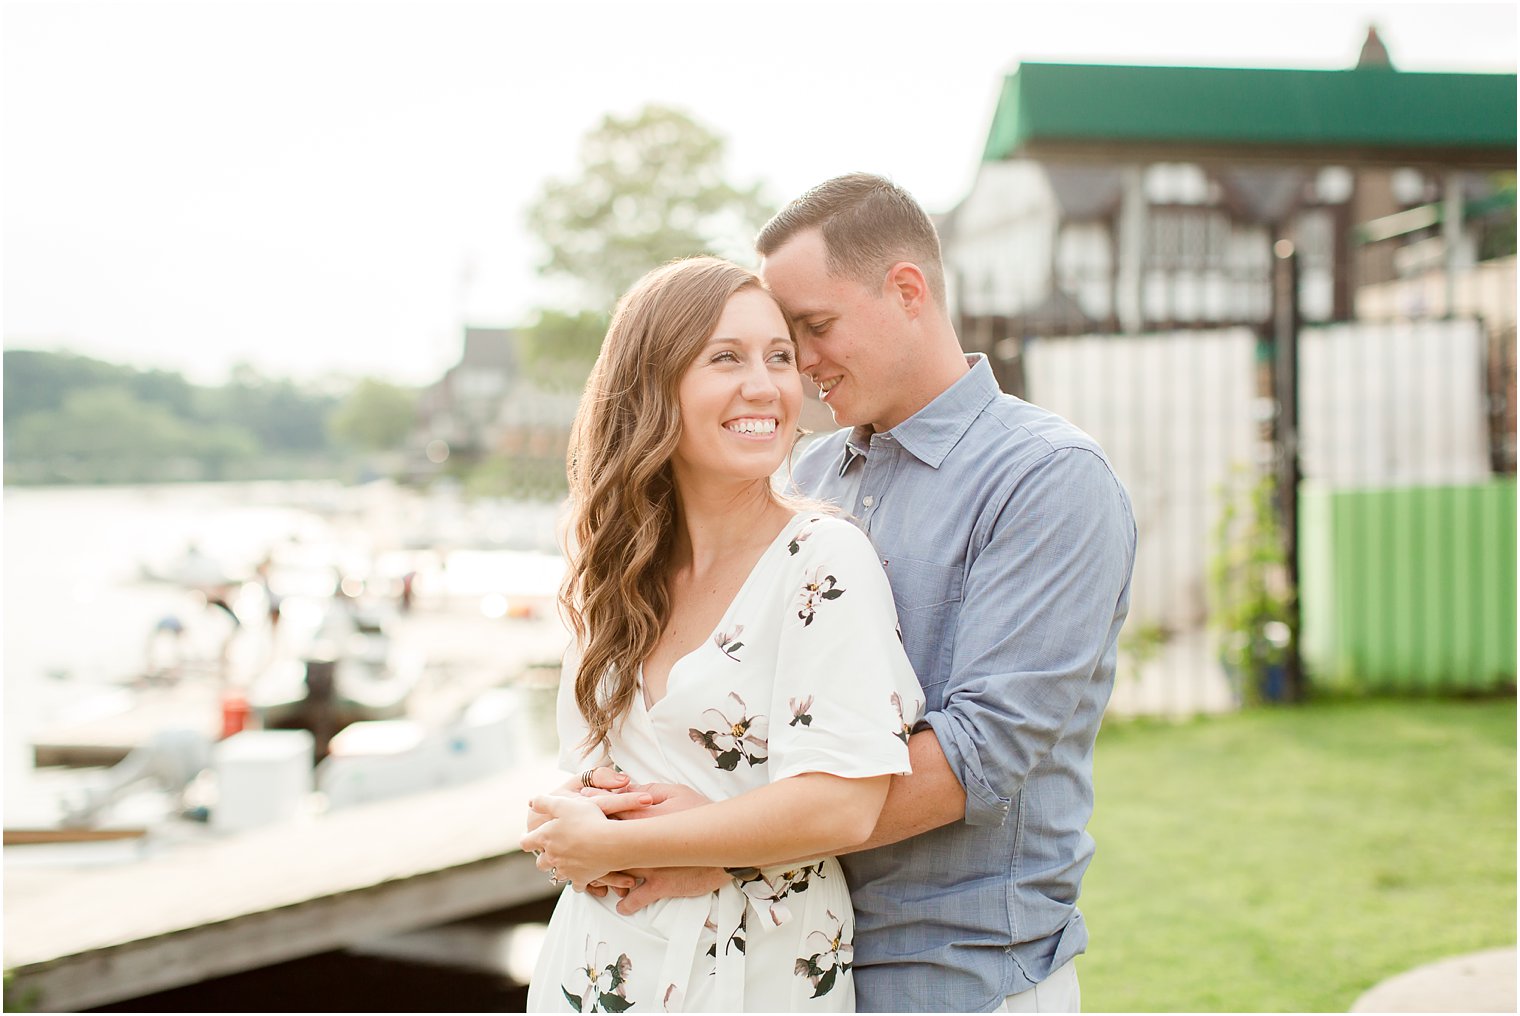 Happy bride and groom at engagement session | Philadelphia Engagement Photography